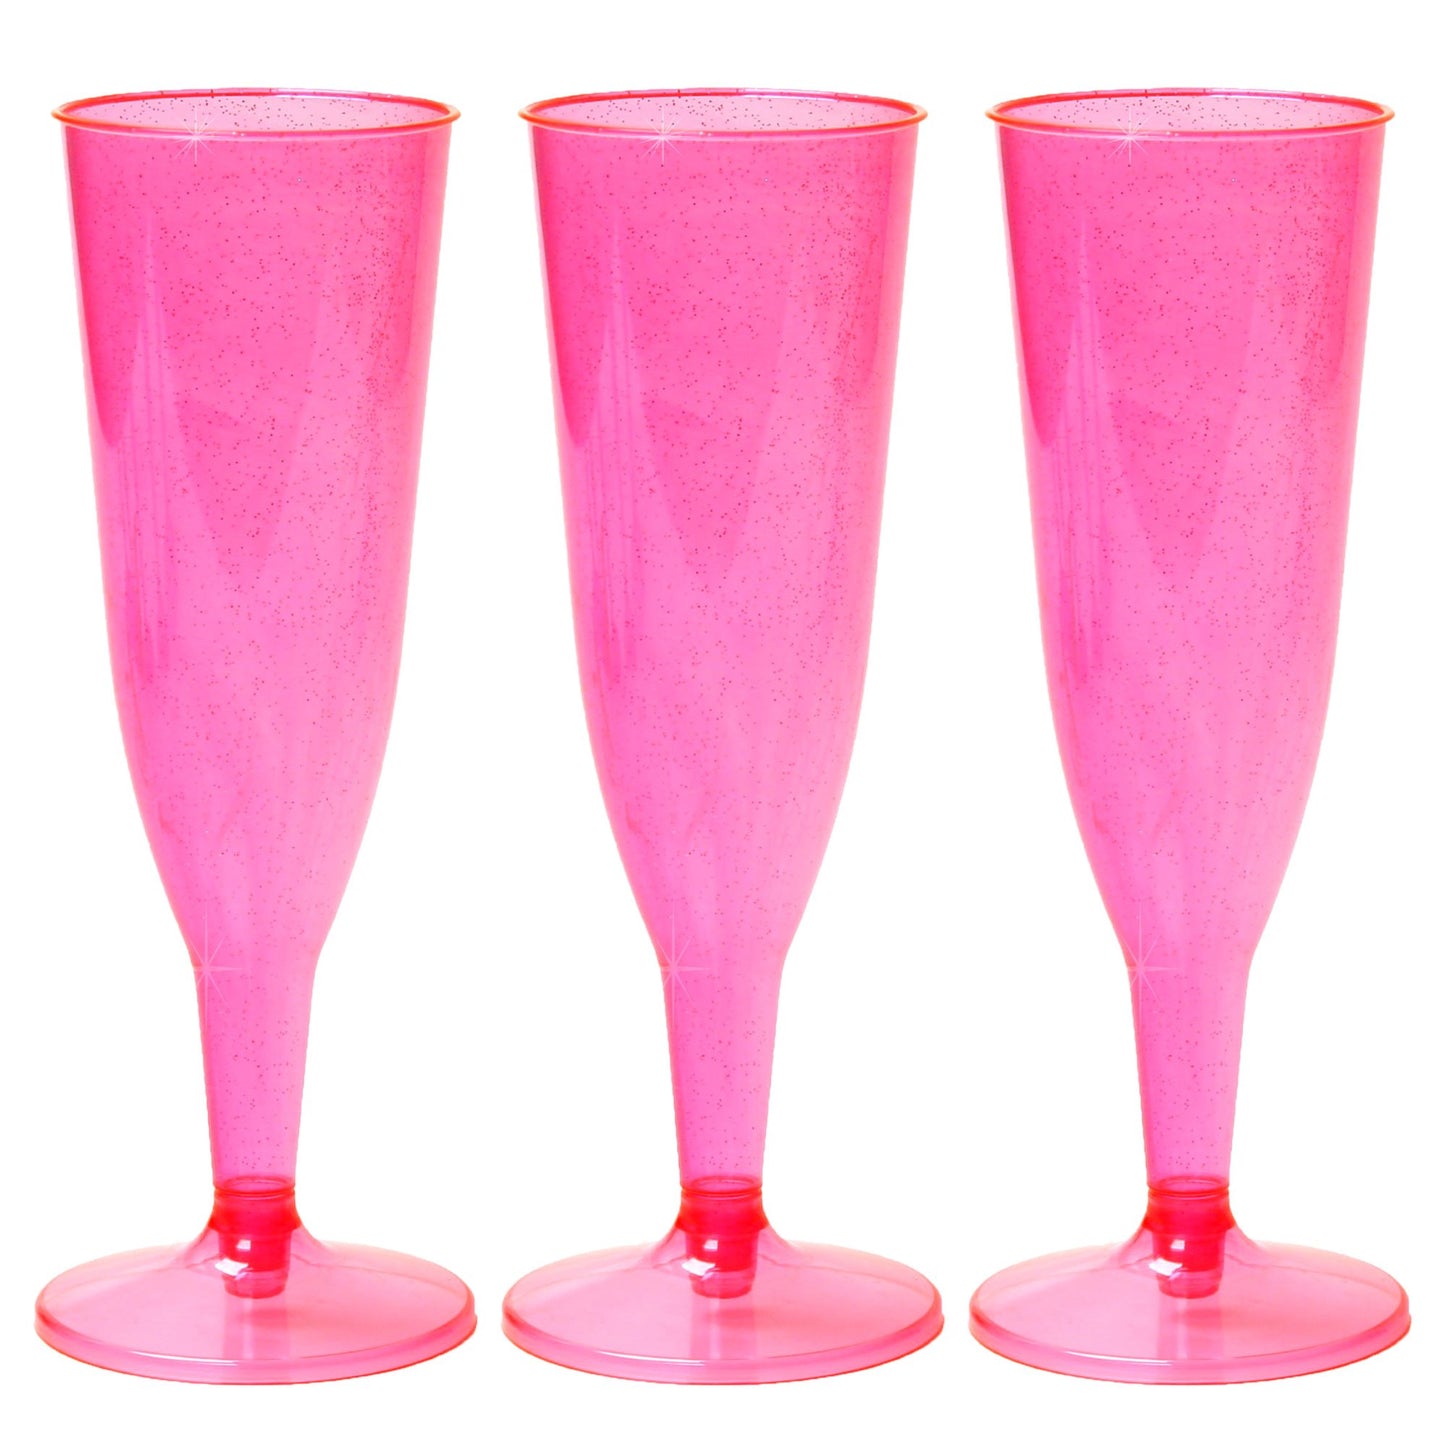 24 x Pink Silver Glitter Prosecco Flutes 175ml 6oz Recyclable Polystyrene Material Transparent 2-Piece Champagne Glasses BBQs Picnics-5056020183525-PCUP-CHAMP2PPINK-SGx4-Product Pro-Champagne Glasses, Clear Champagne Glasses, Glitter, Pink, Plastic Flutes, Prosecco Flutes